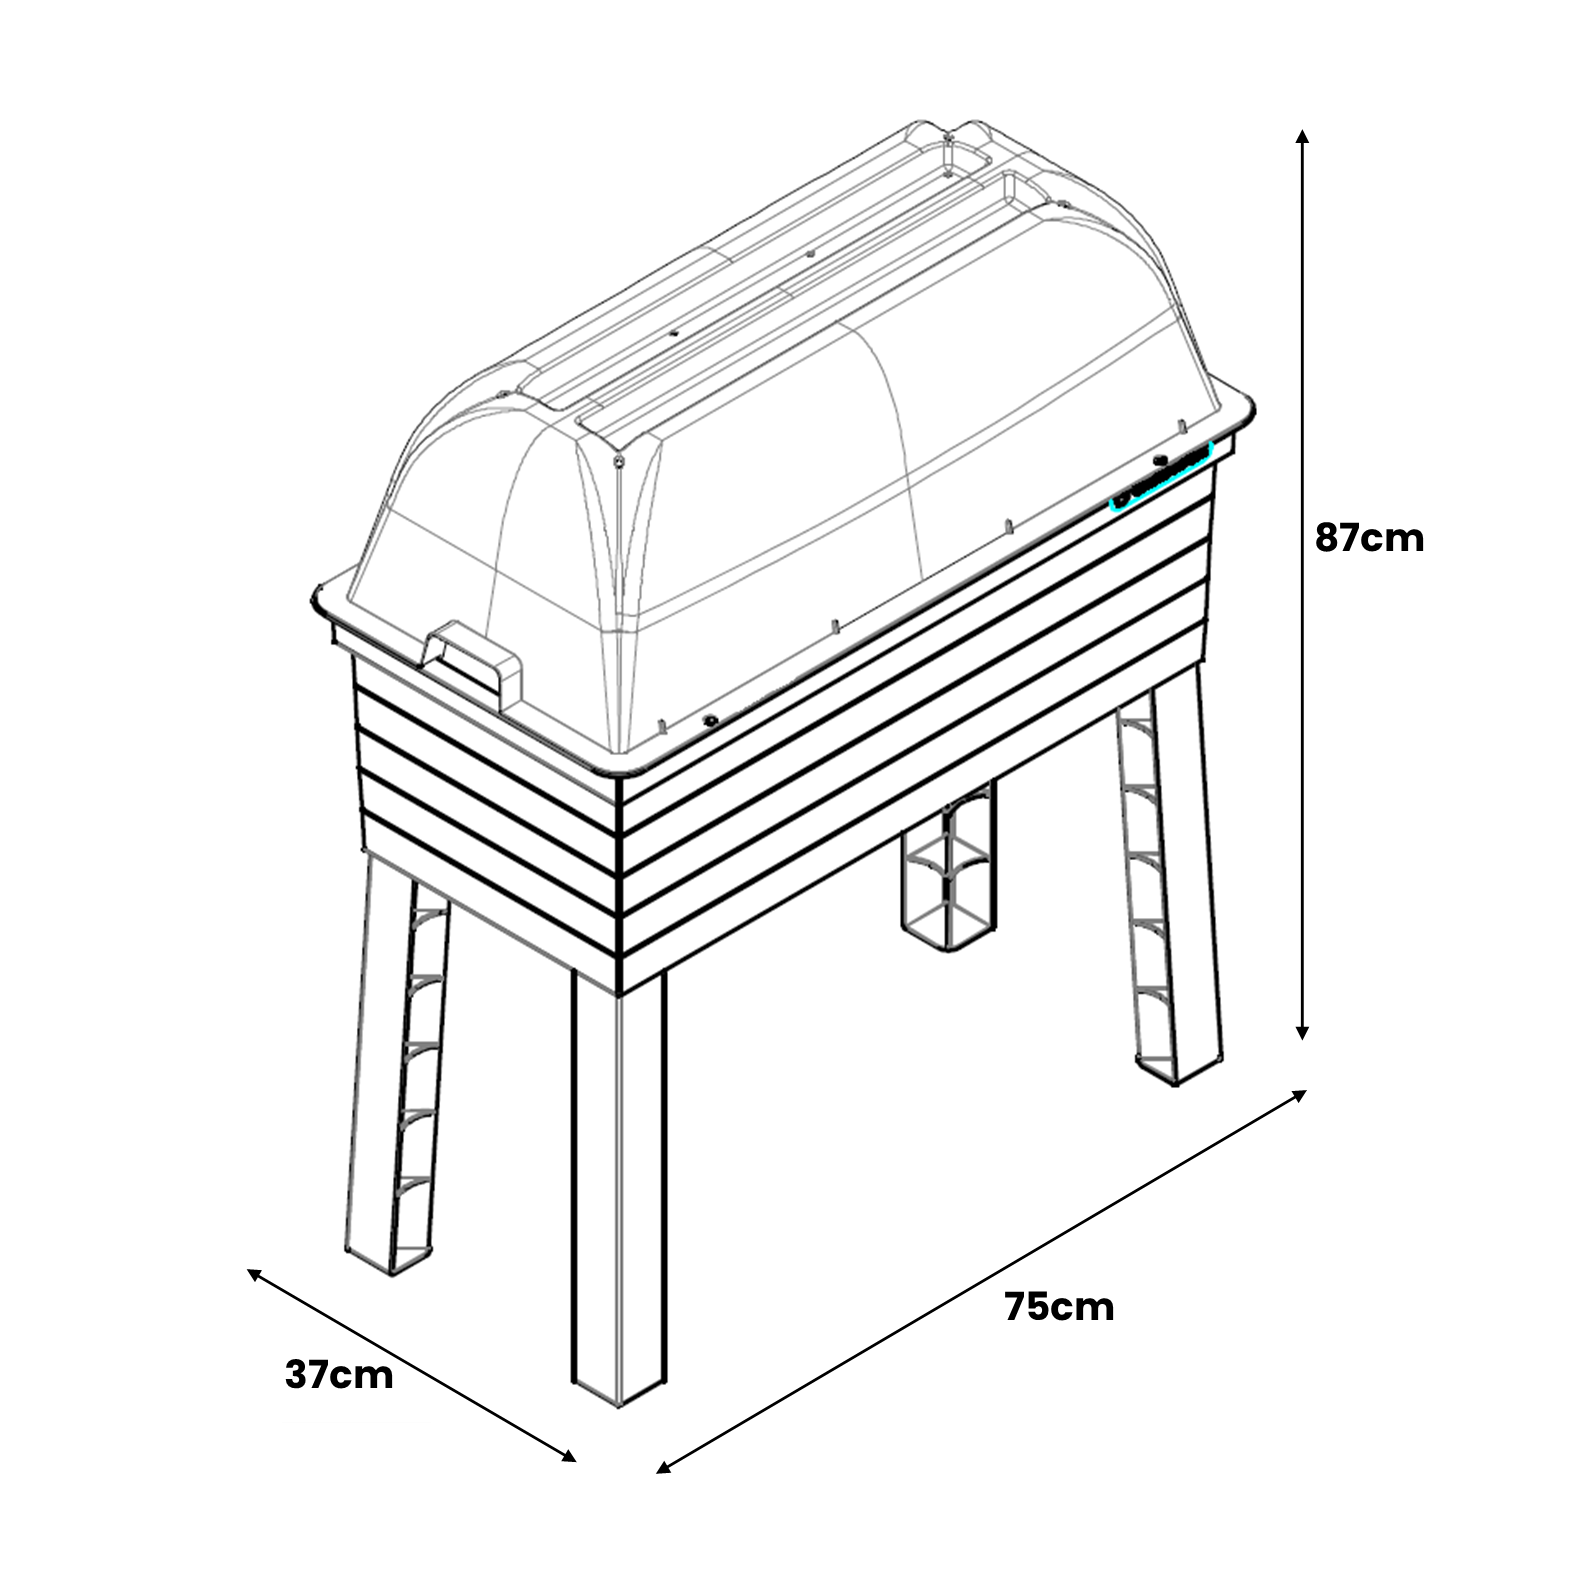 URBAN-Raised-Planter-with-Cloche-Cover-Dimensions-Image.png